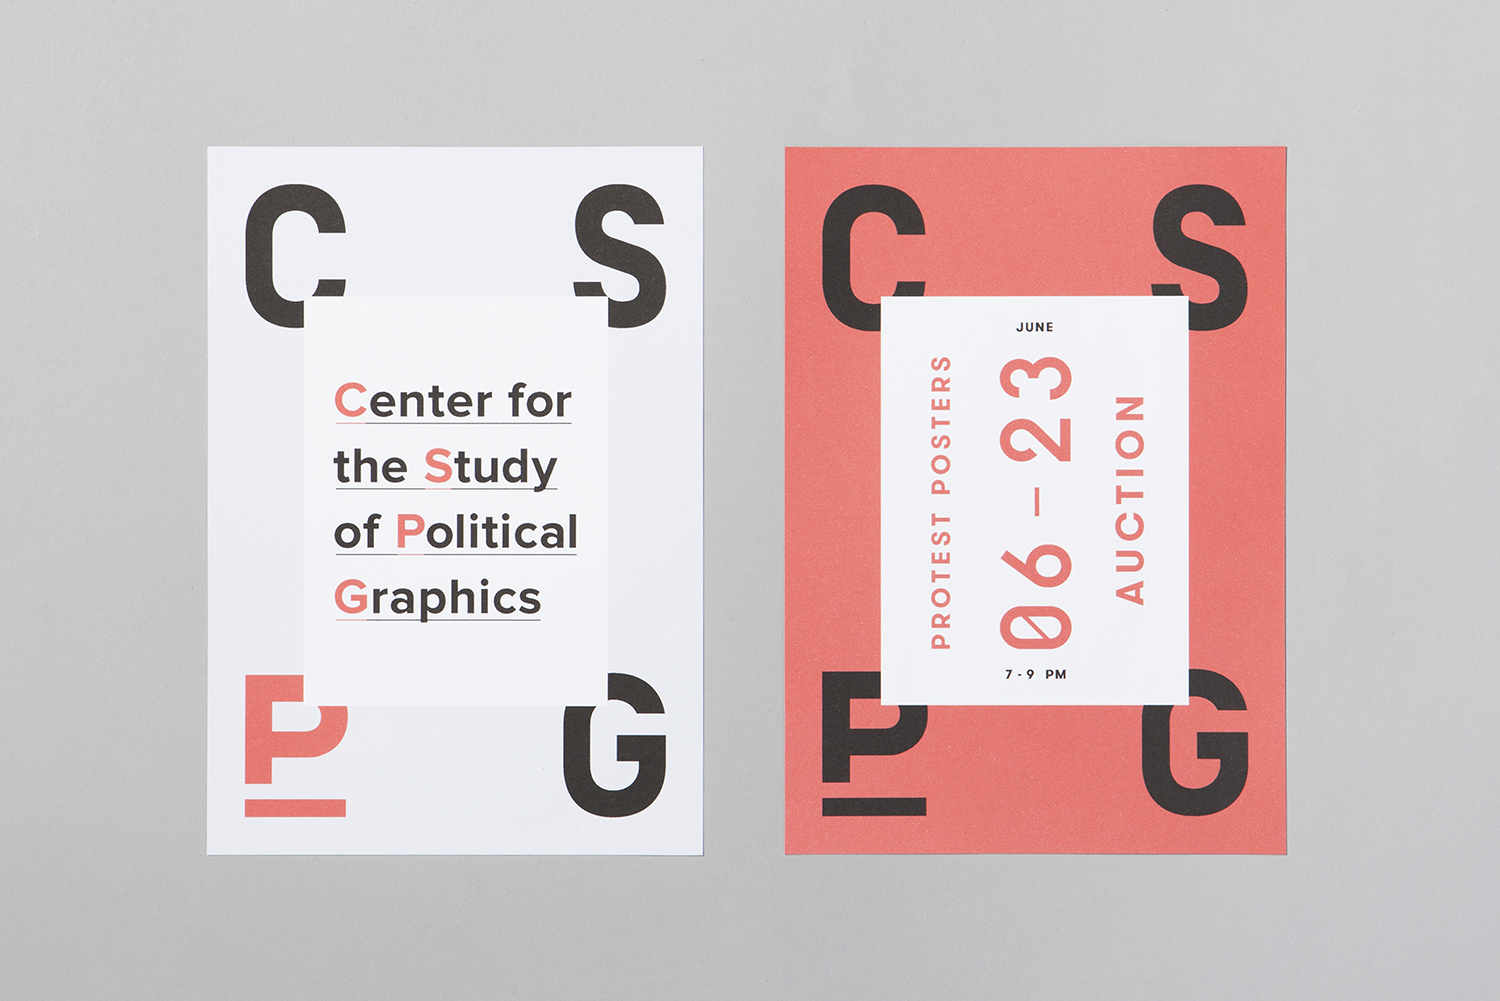 Framing in Branding – Center for the Study of Political Graphics by Blok